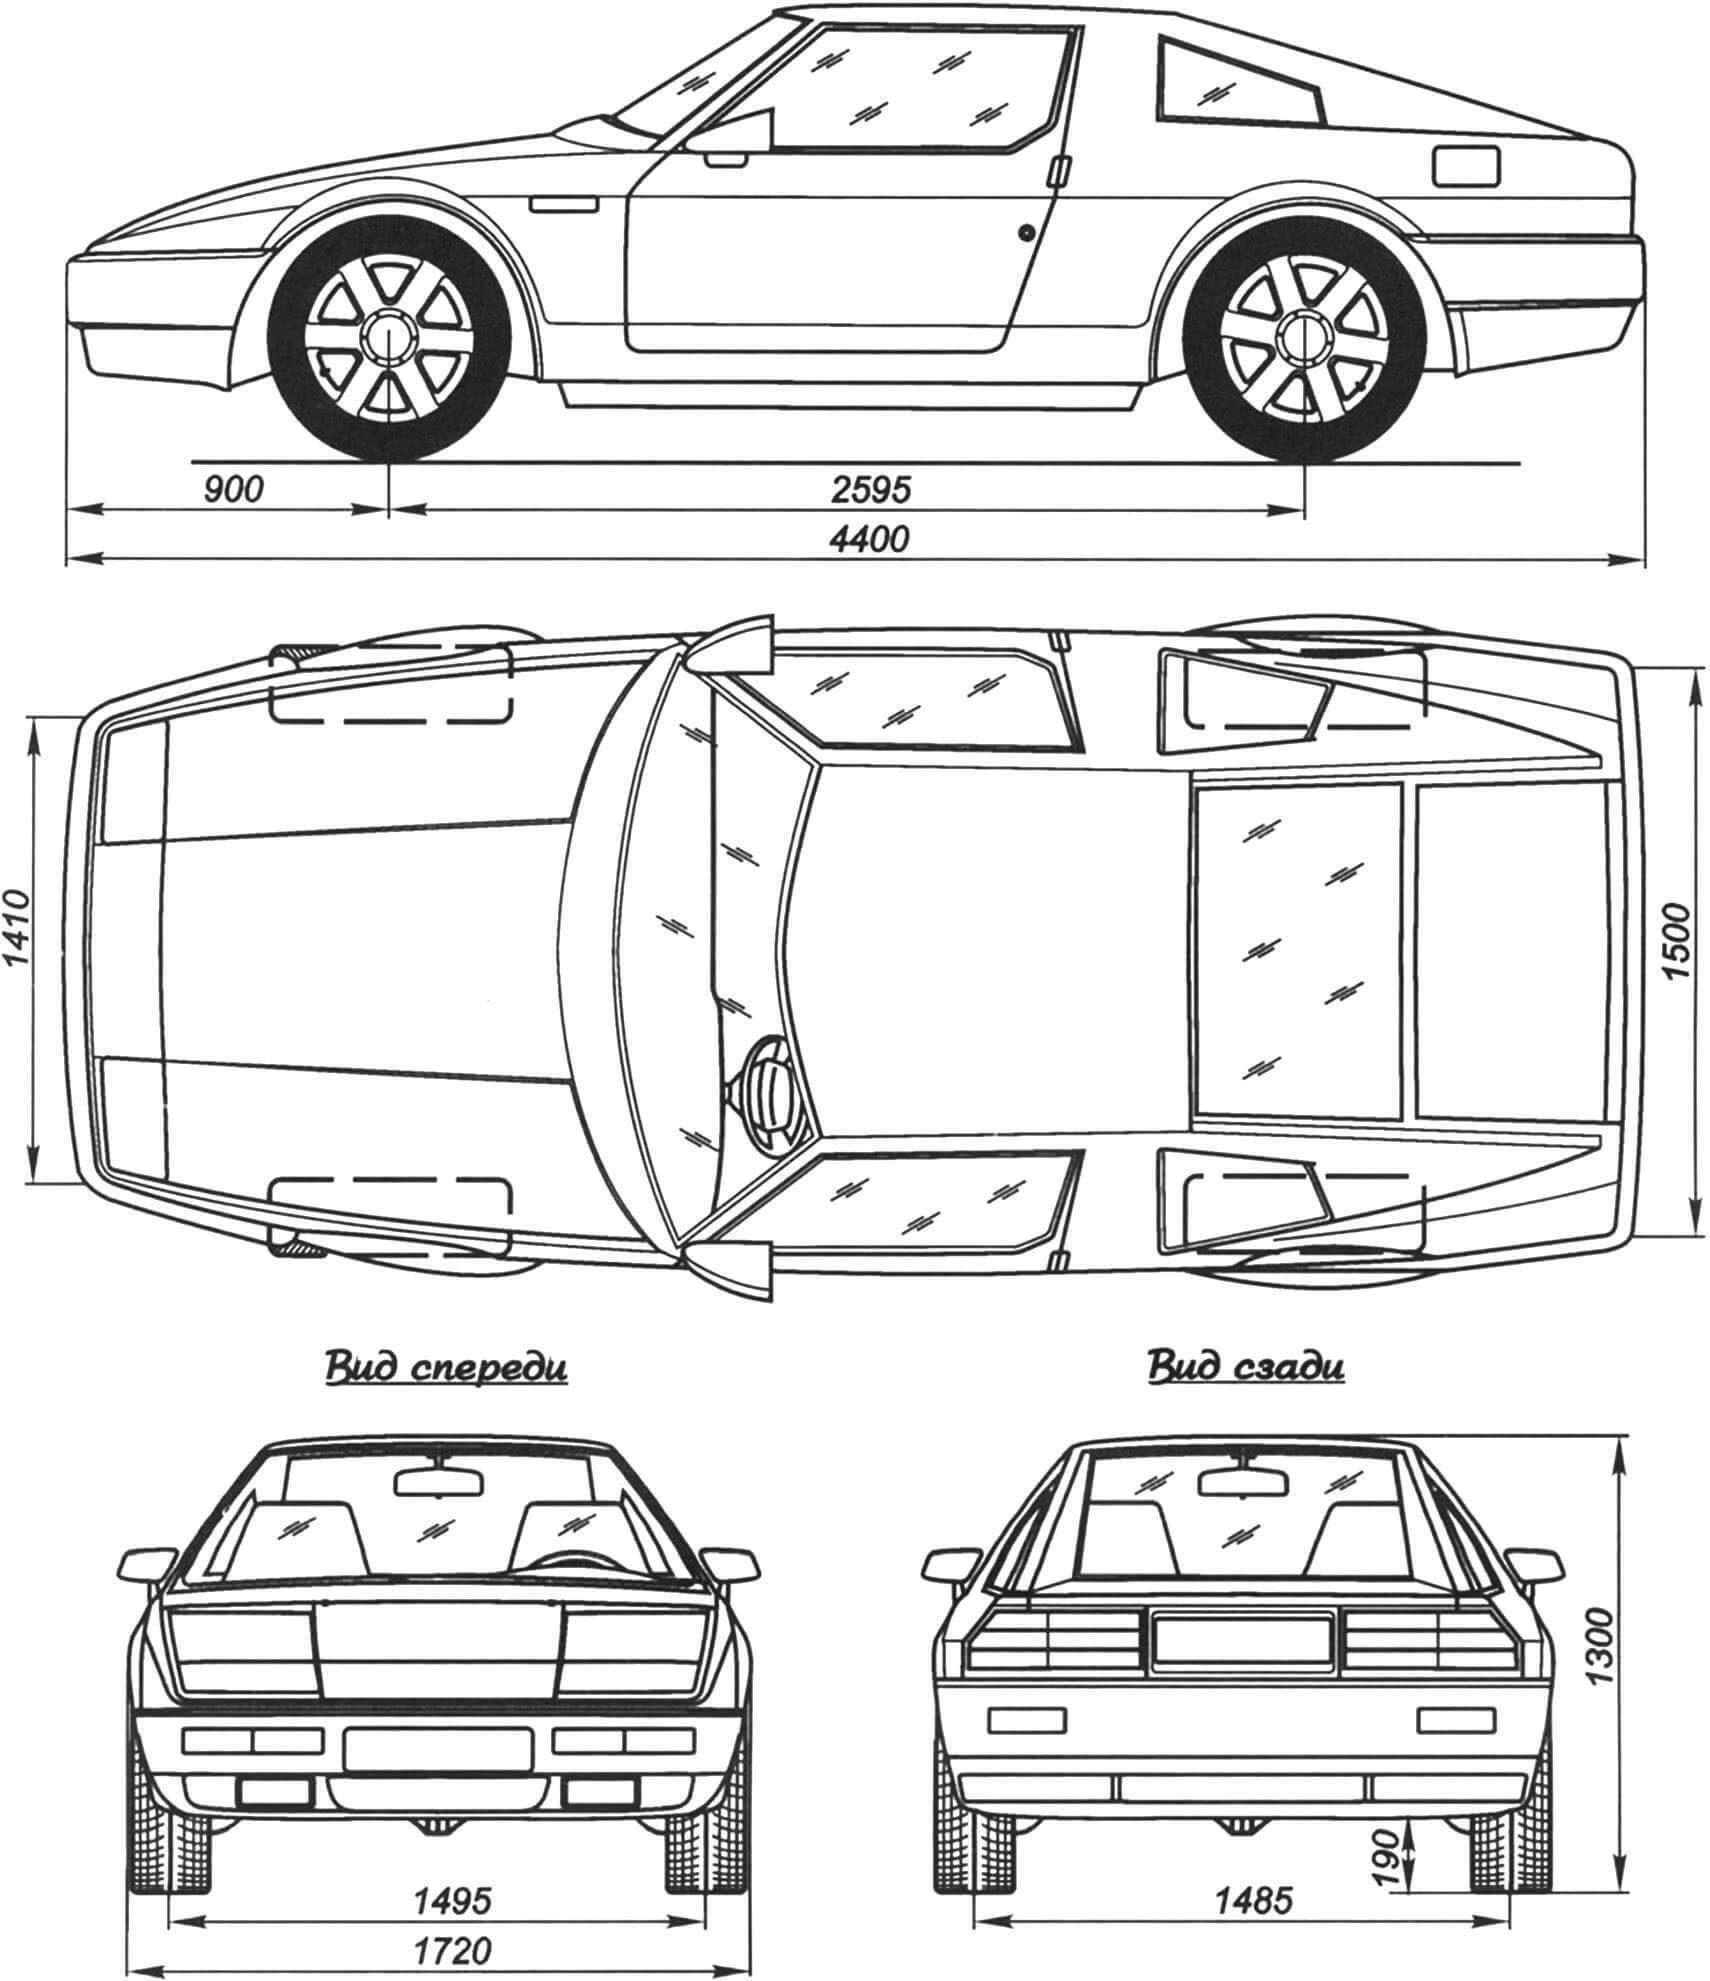 Geometric diagram of the new version of the car "Yuna"